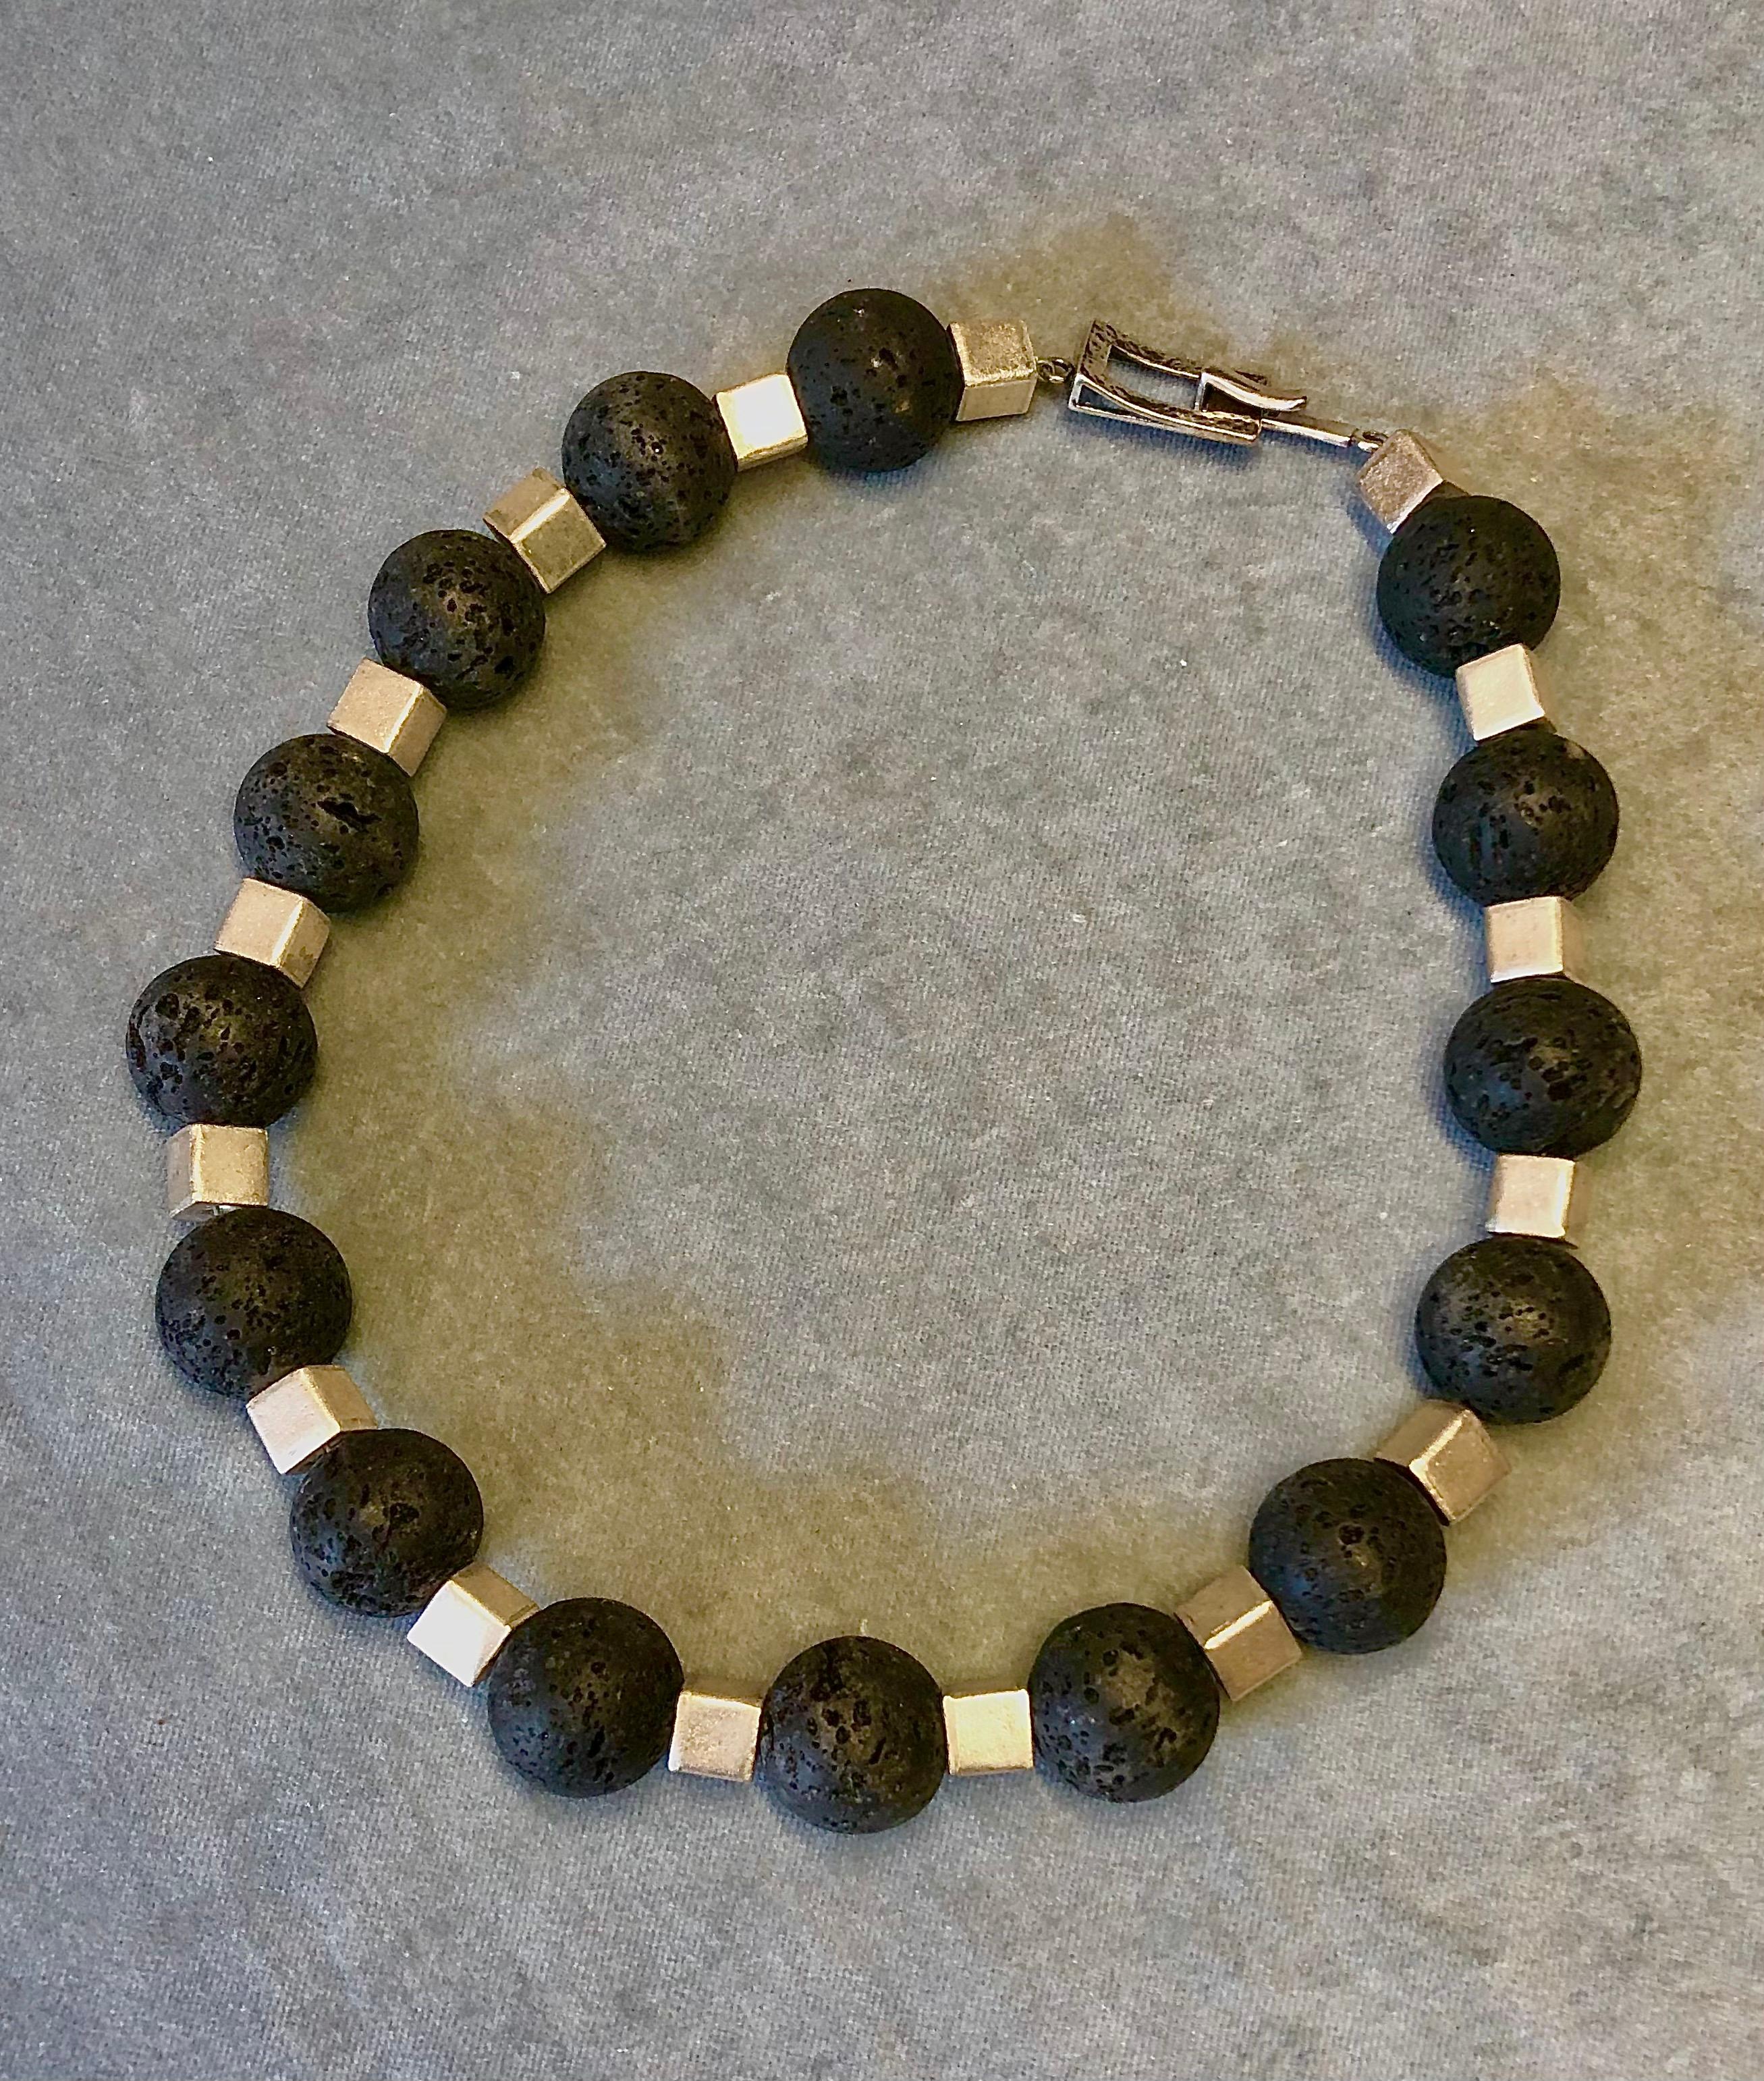 Single strand necklace. Round black lava beads, square white metal spacers and sterling silver toggle clasp. 